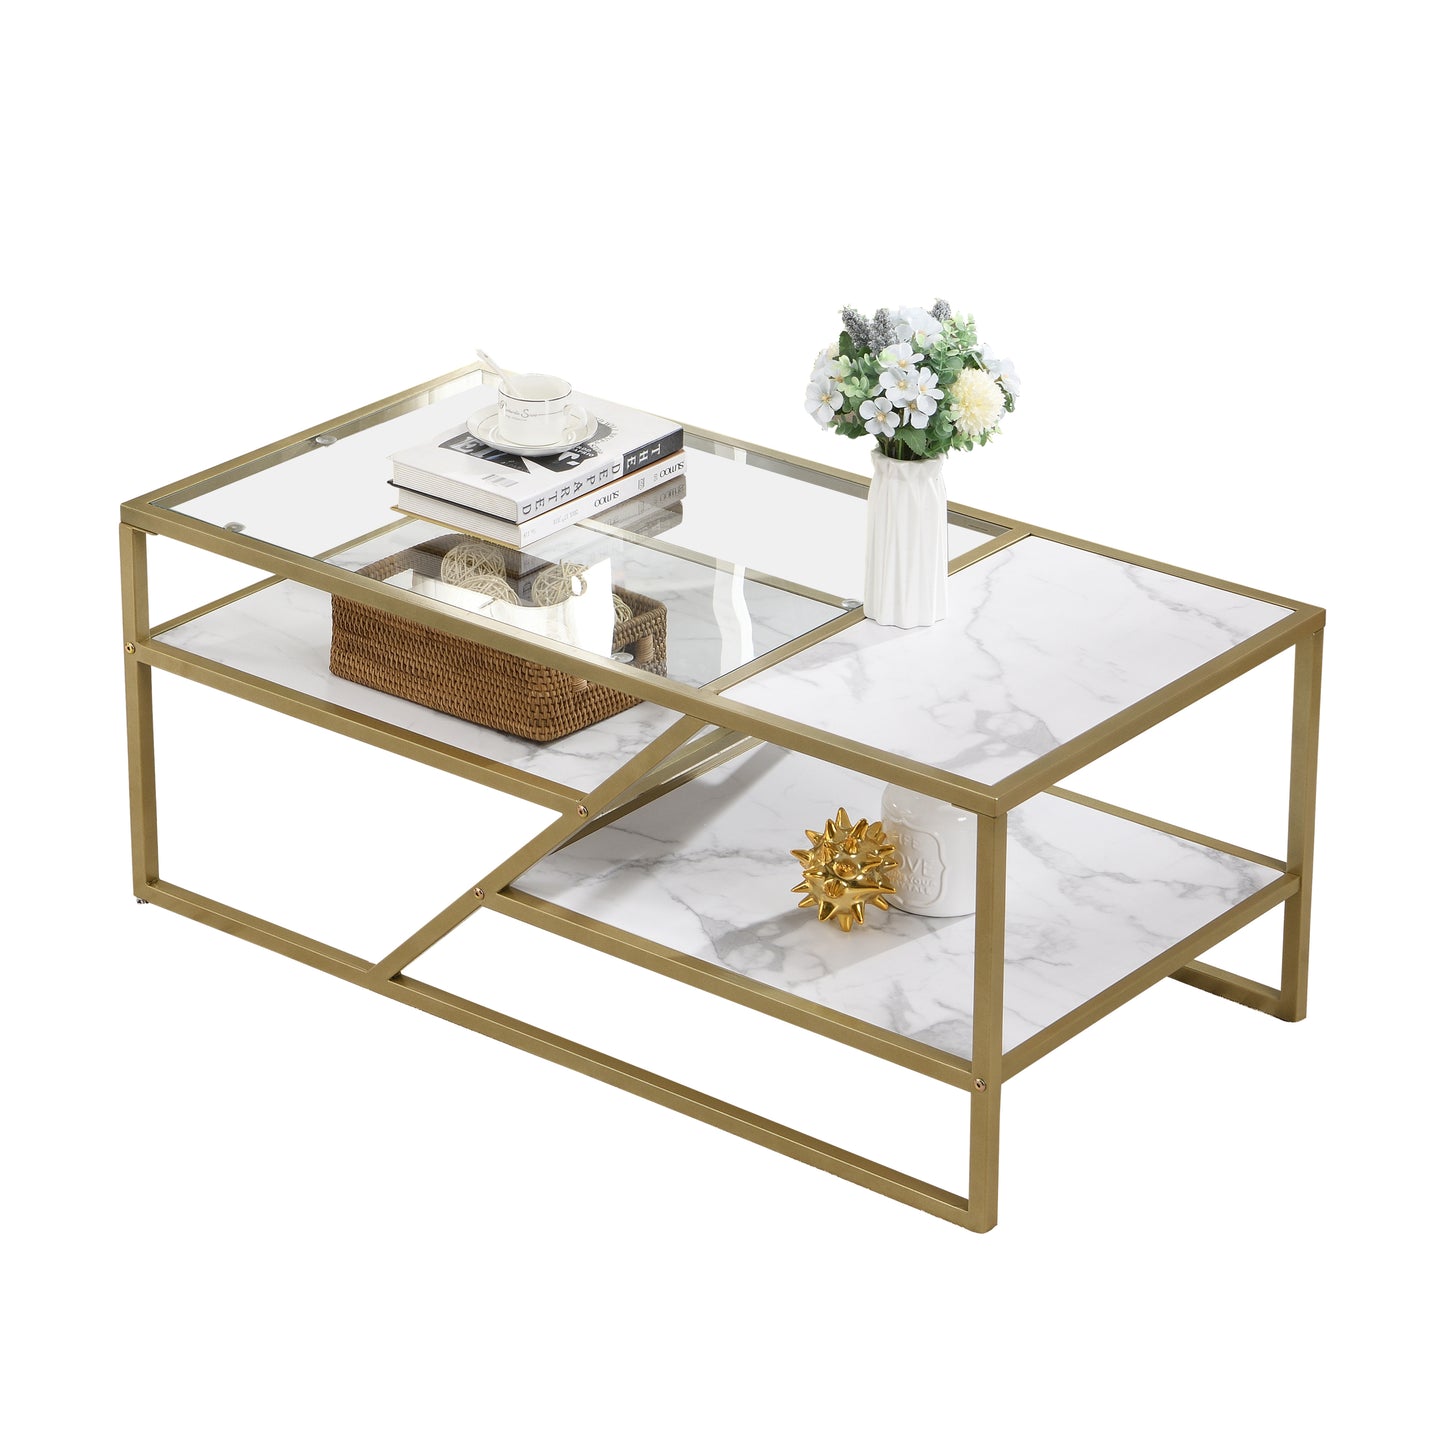 Golden Coffee Table with Storage Shelf